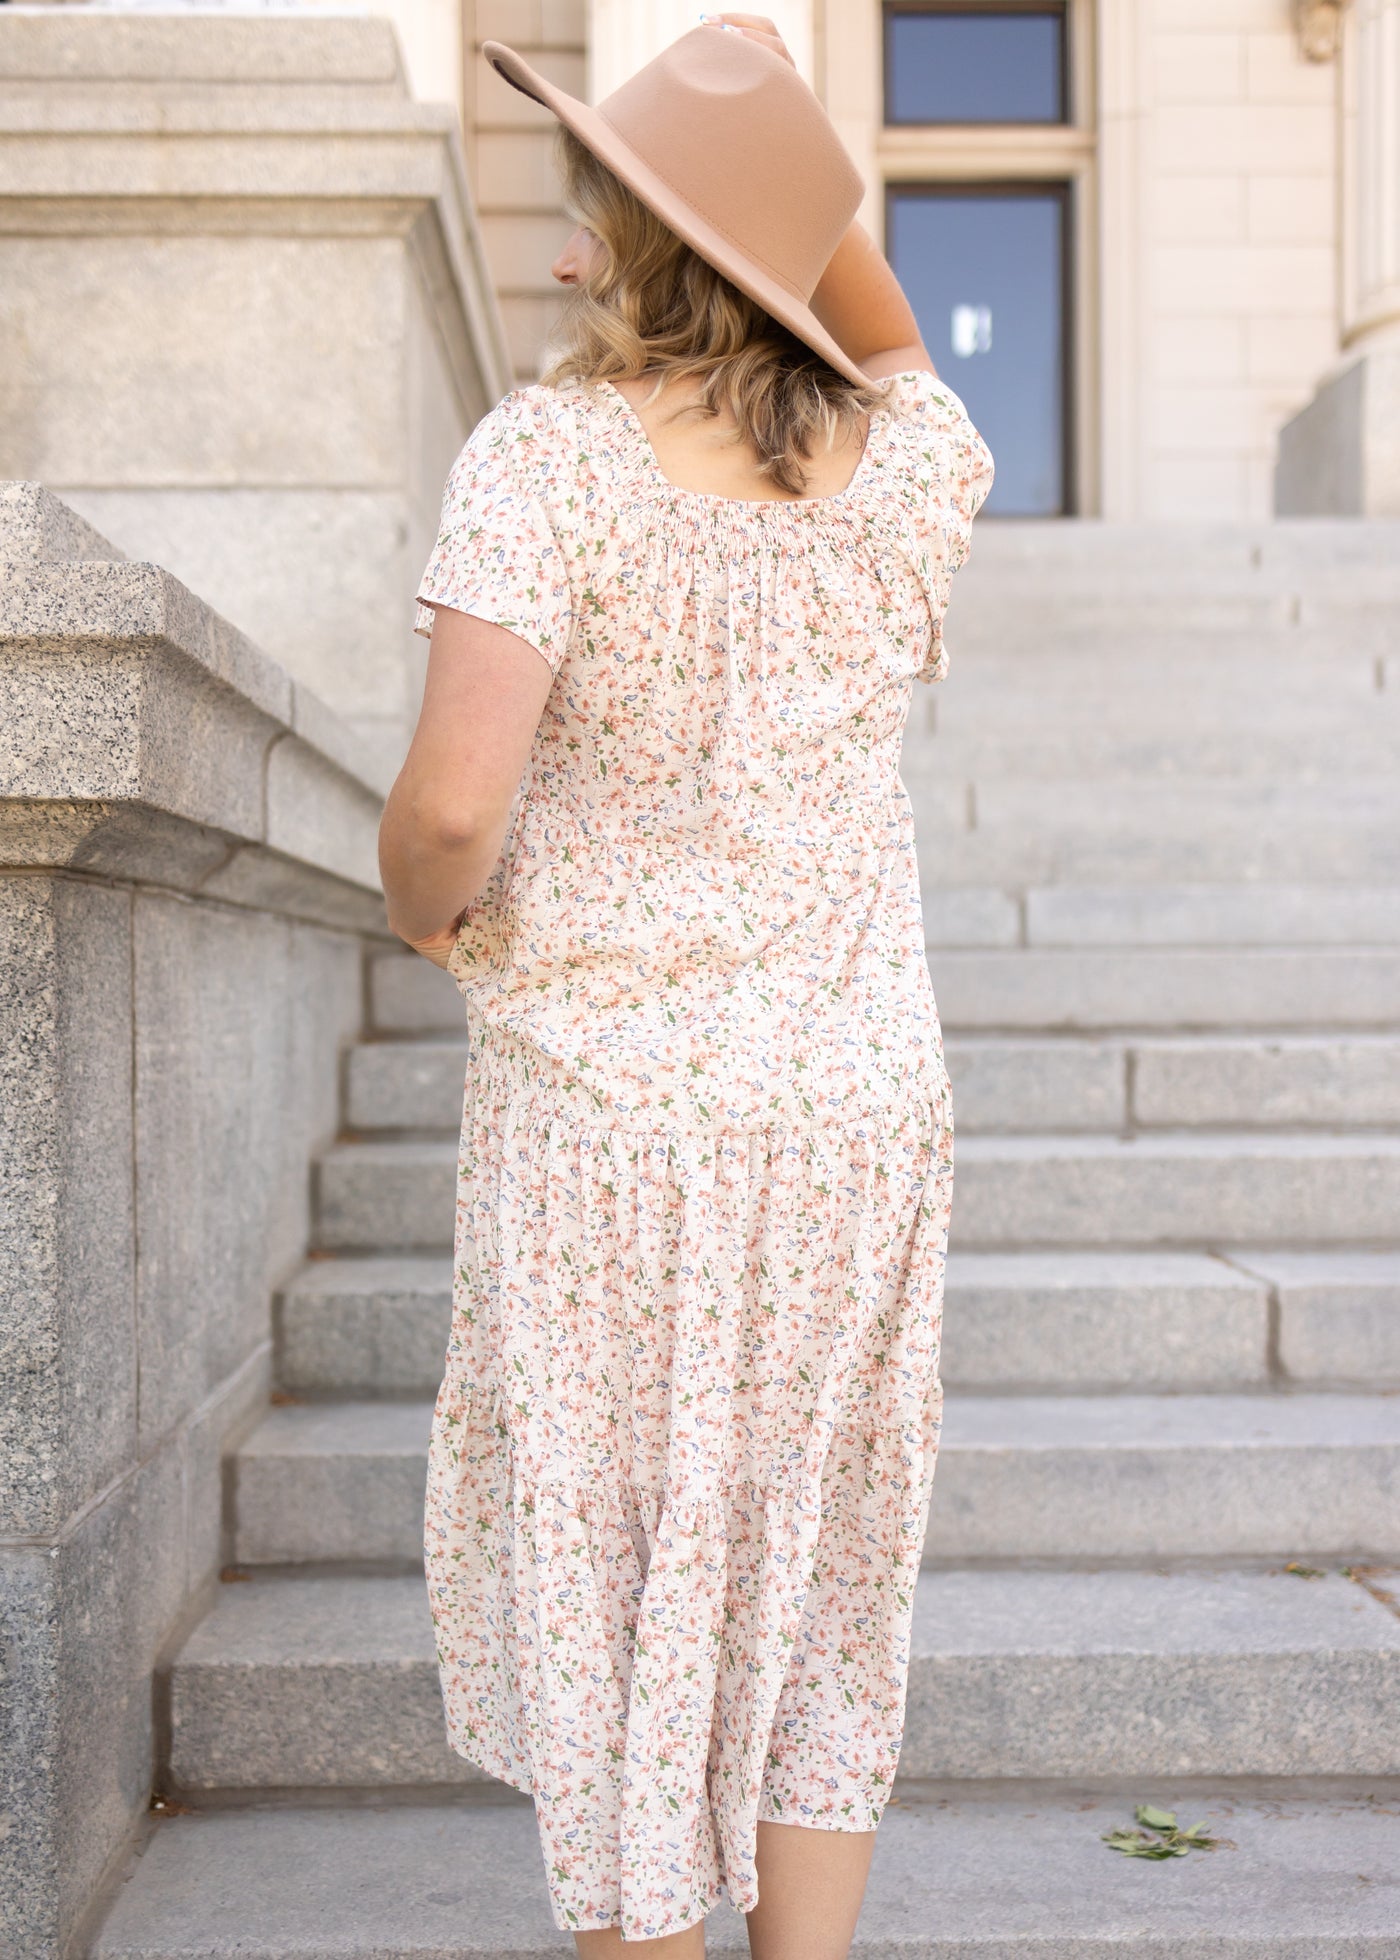 Back view of a short sleeve cream floral dress